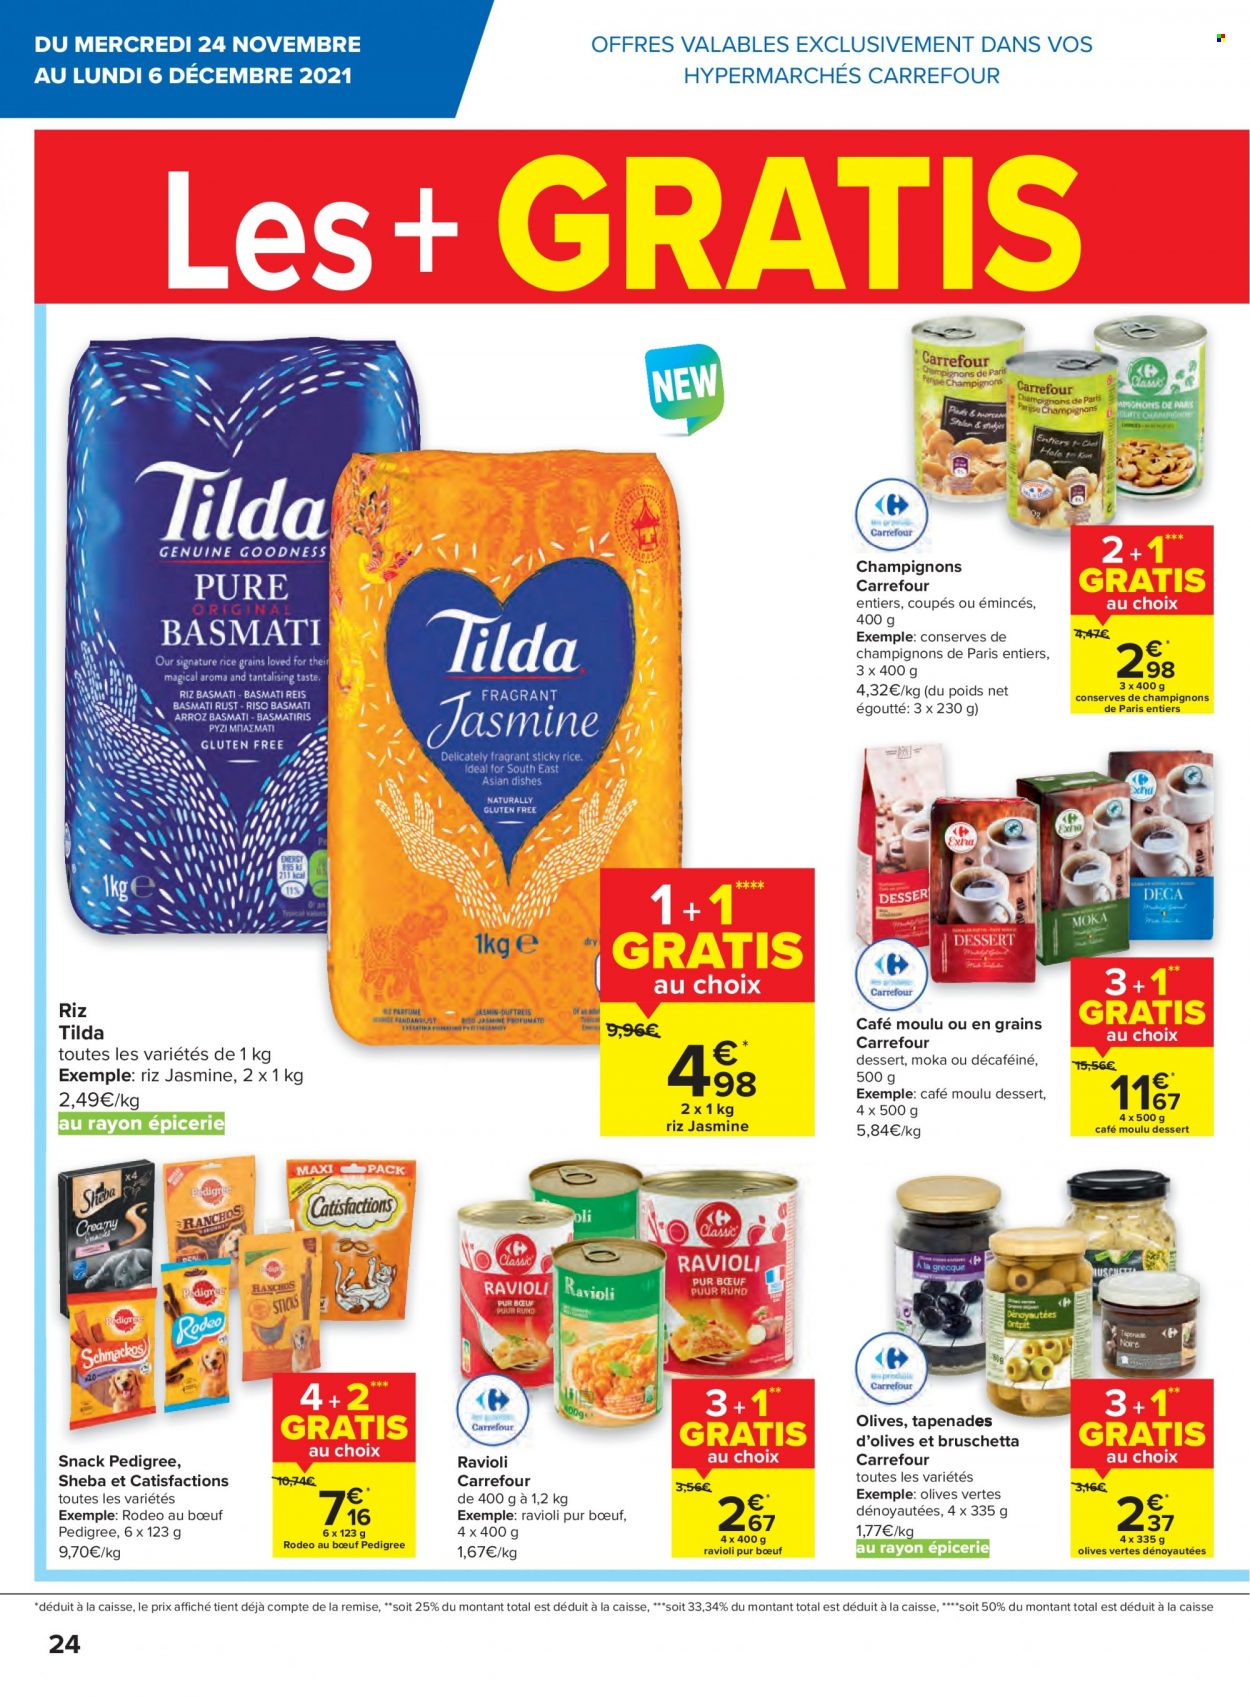 Catalogue Carrefour hypermarkt - 24.11.2021 - 6.12.2021. Page 24.